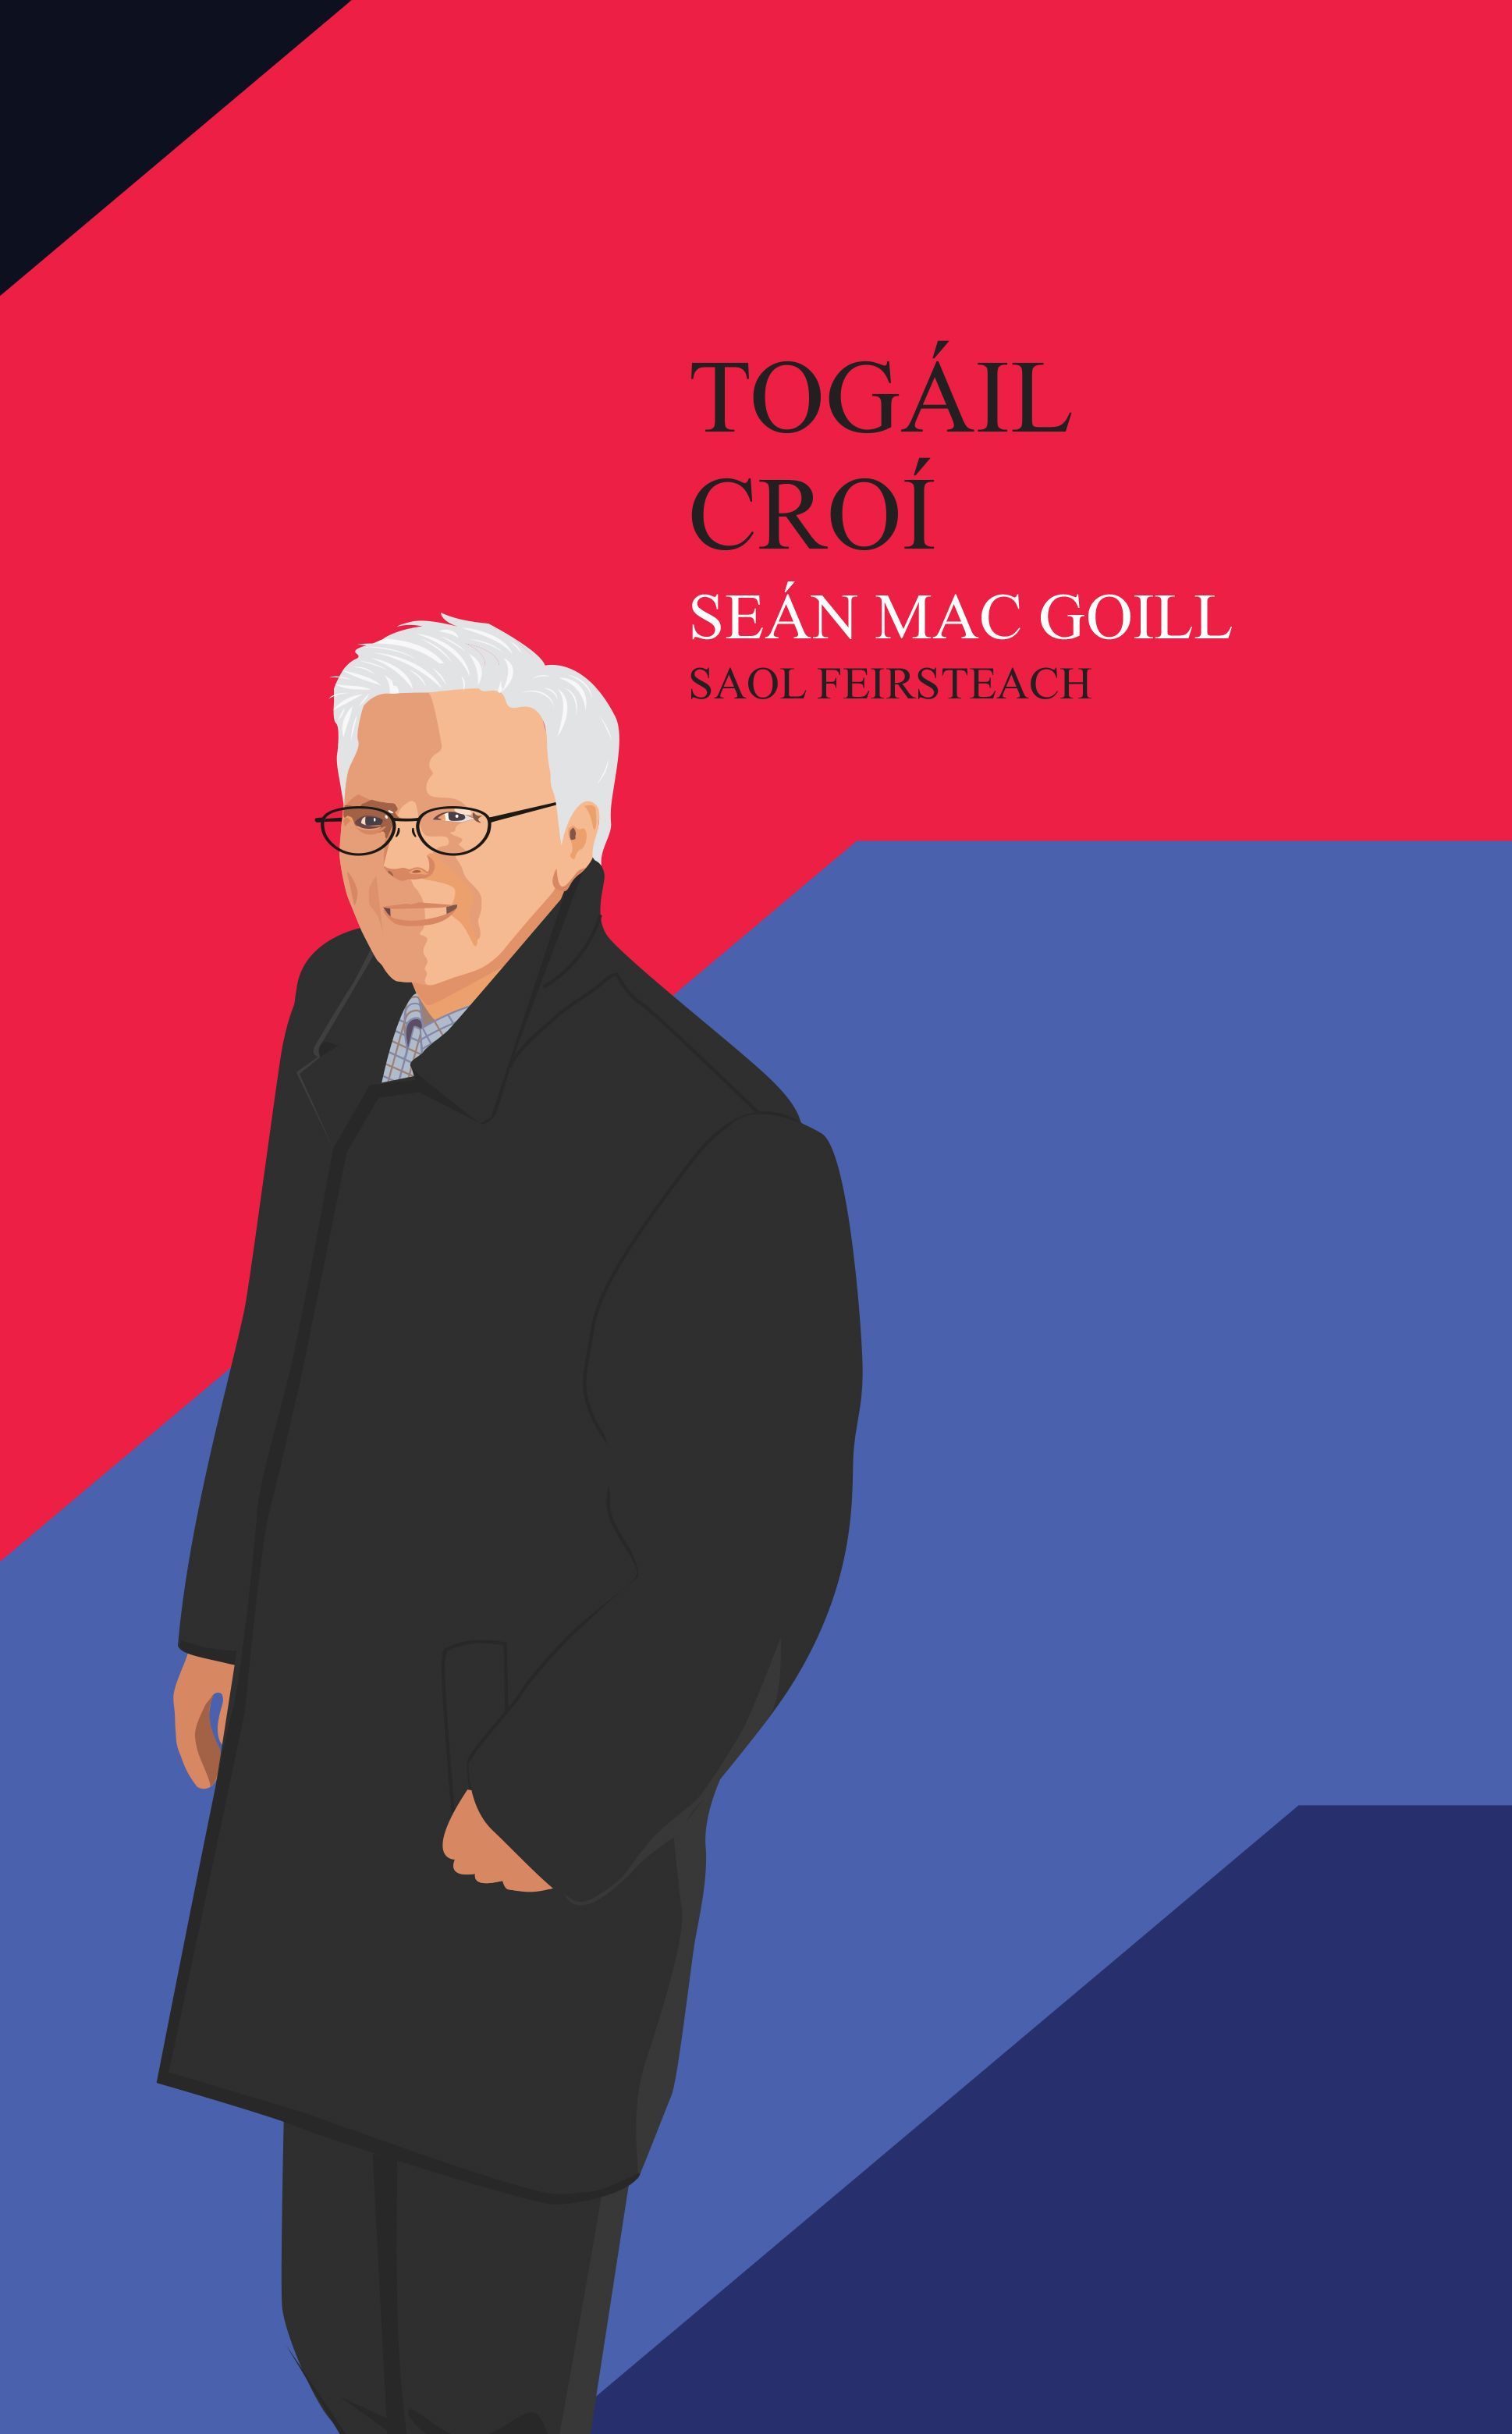 TRAILBLAZING ARCHITECH WHO OPENED NEW CHAPTER FOR IRISH LANGUAGE: The cover of the new book on Seán Mac Goill, \'Togáil Croí\'